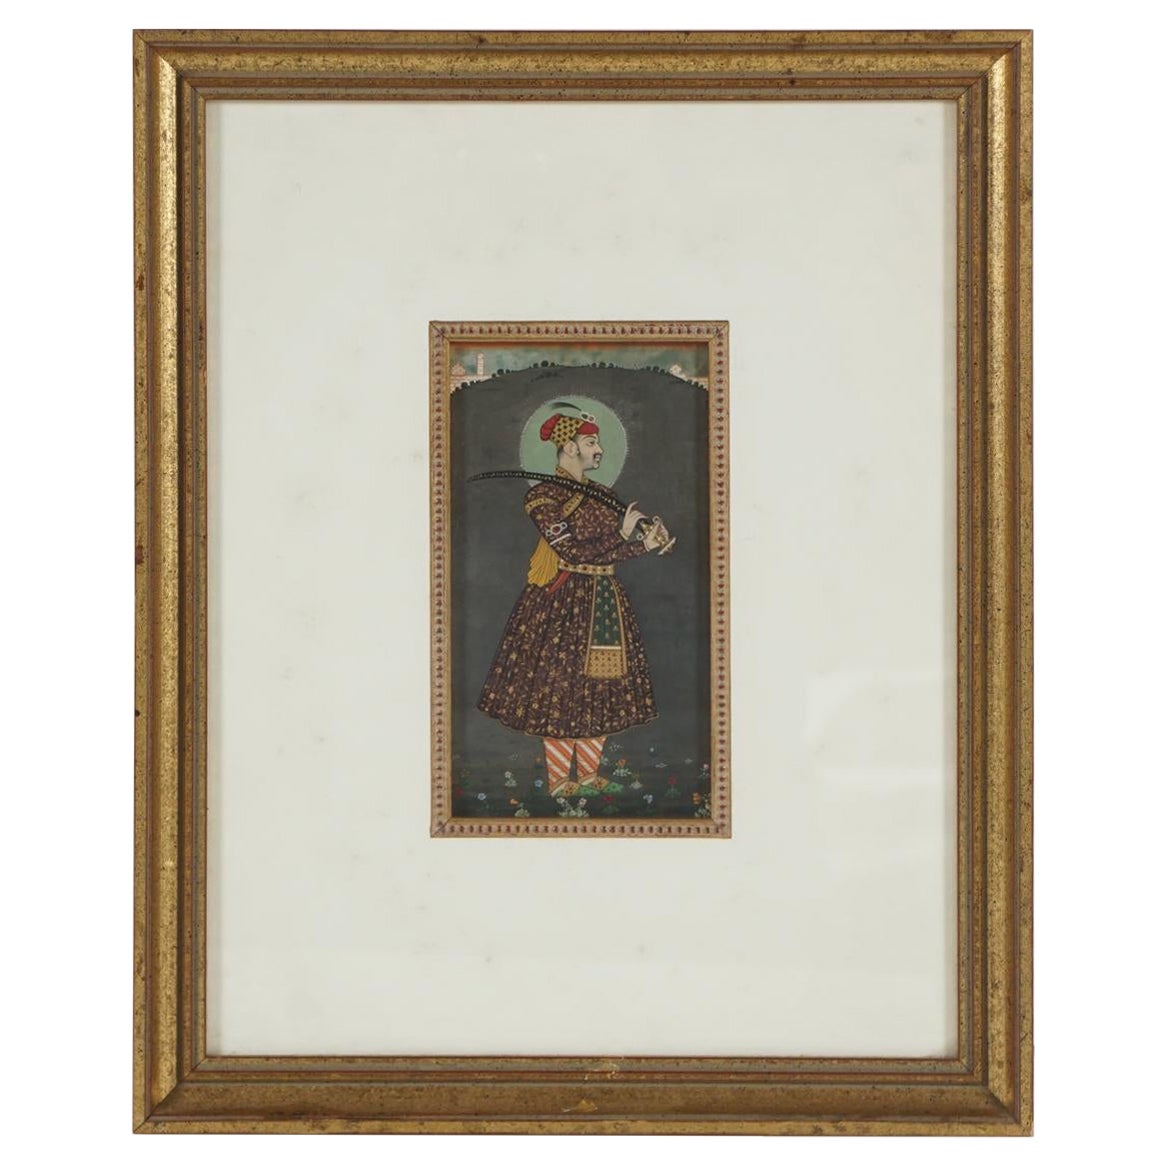 Late 18th Century Moghul Painting of the Emperor Shah Jahan